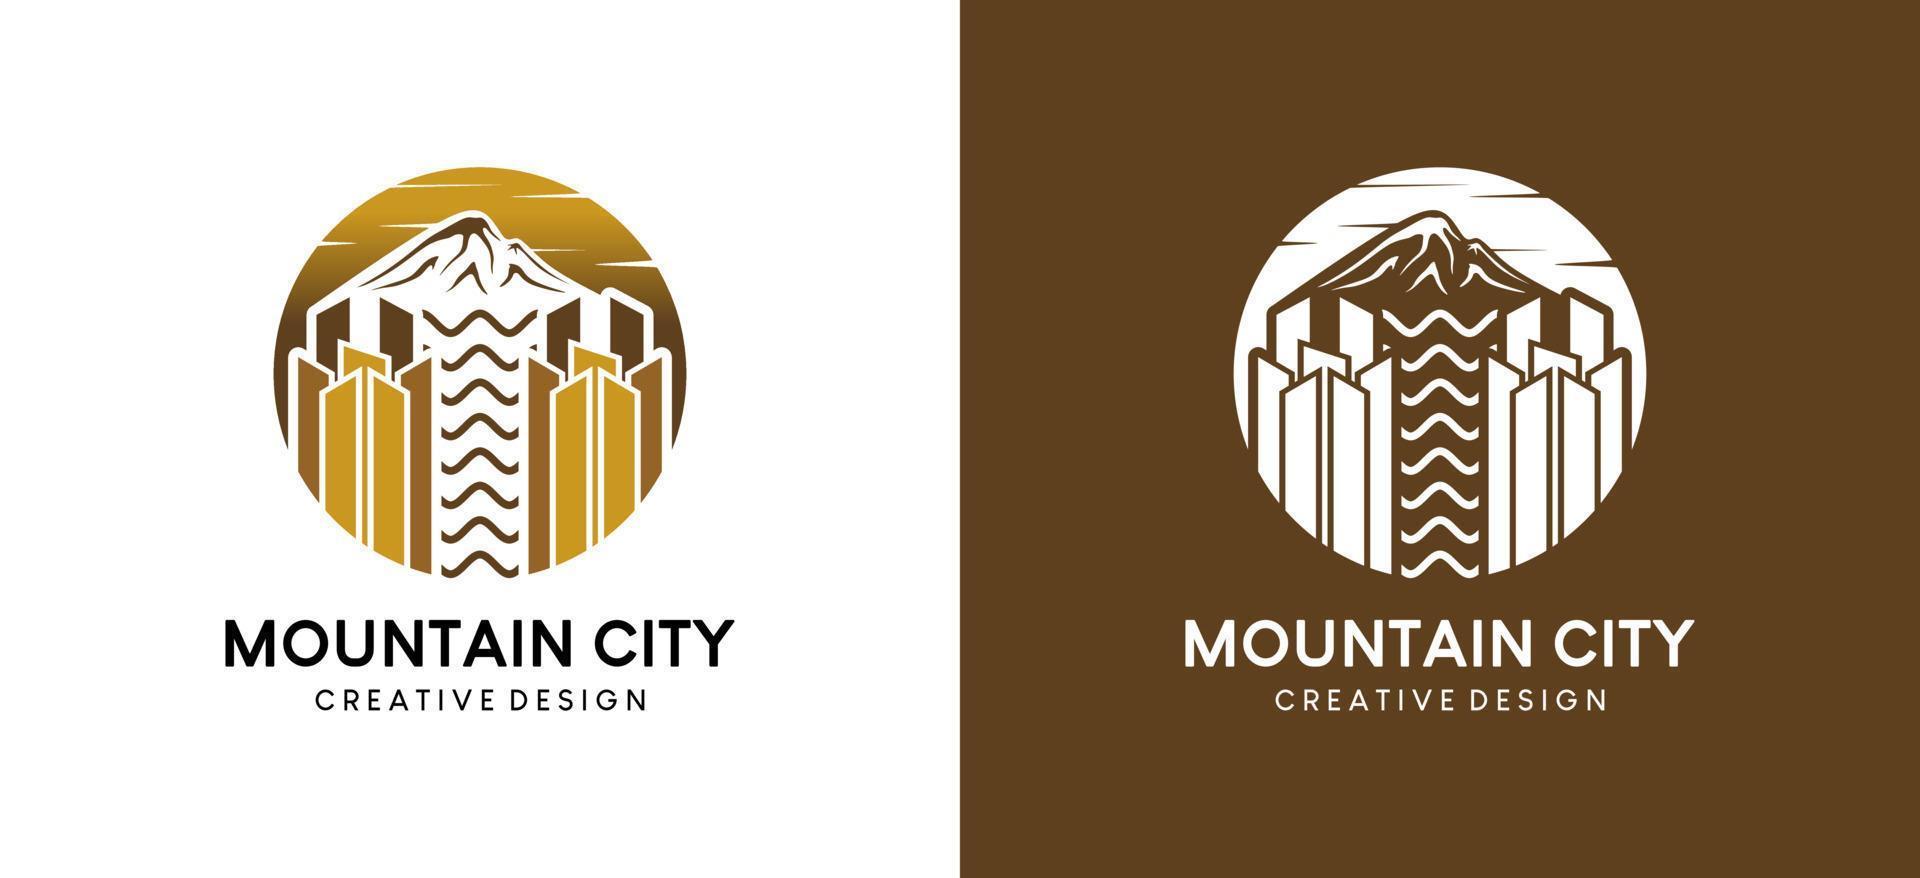 Mountain city logo design, luxury style building and mountain combination vector illustration